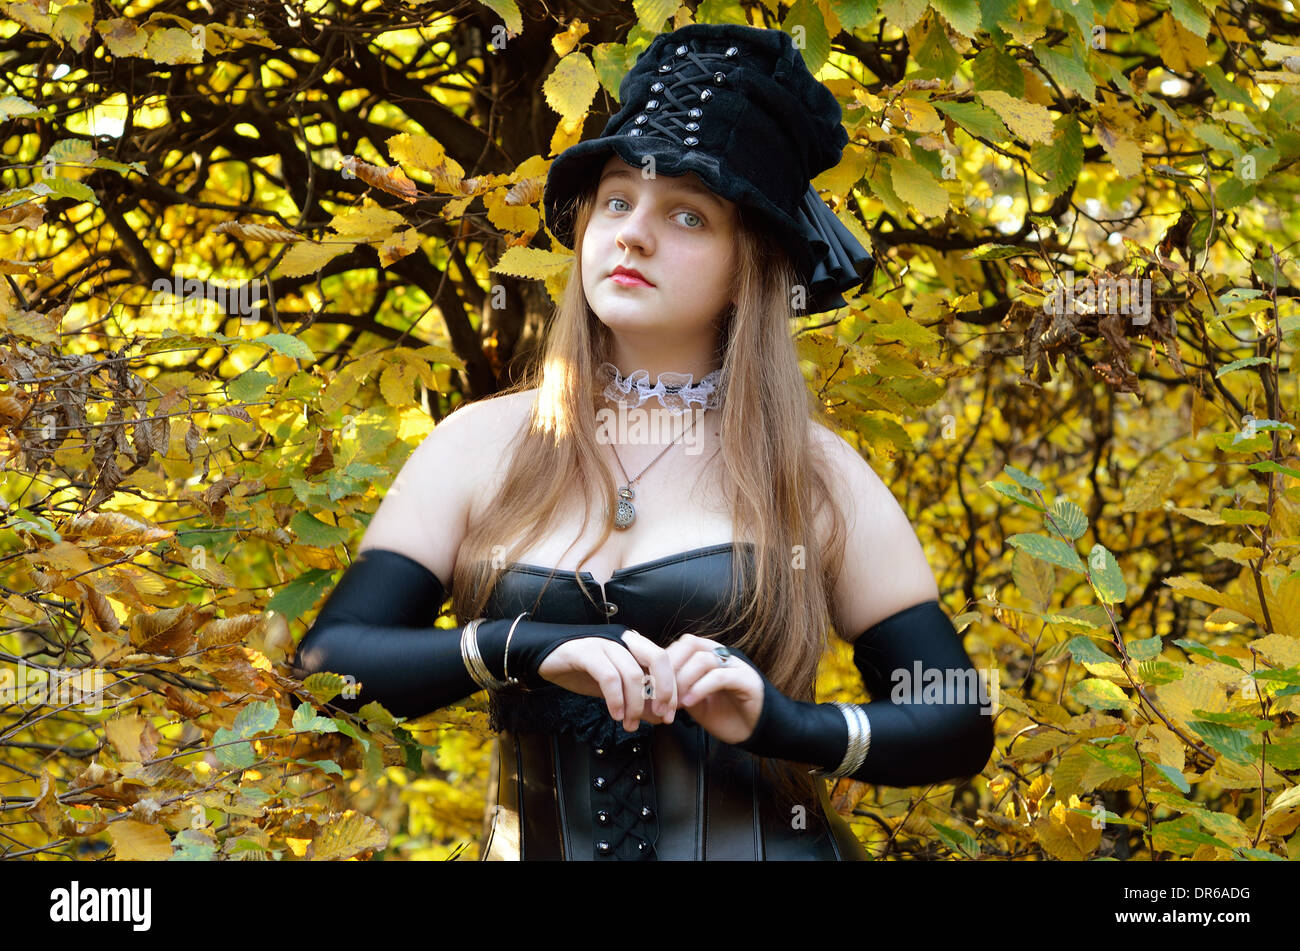 Cosplayer in autunno park Foto Stock